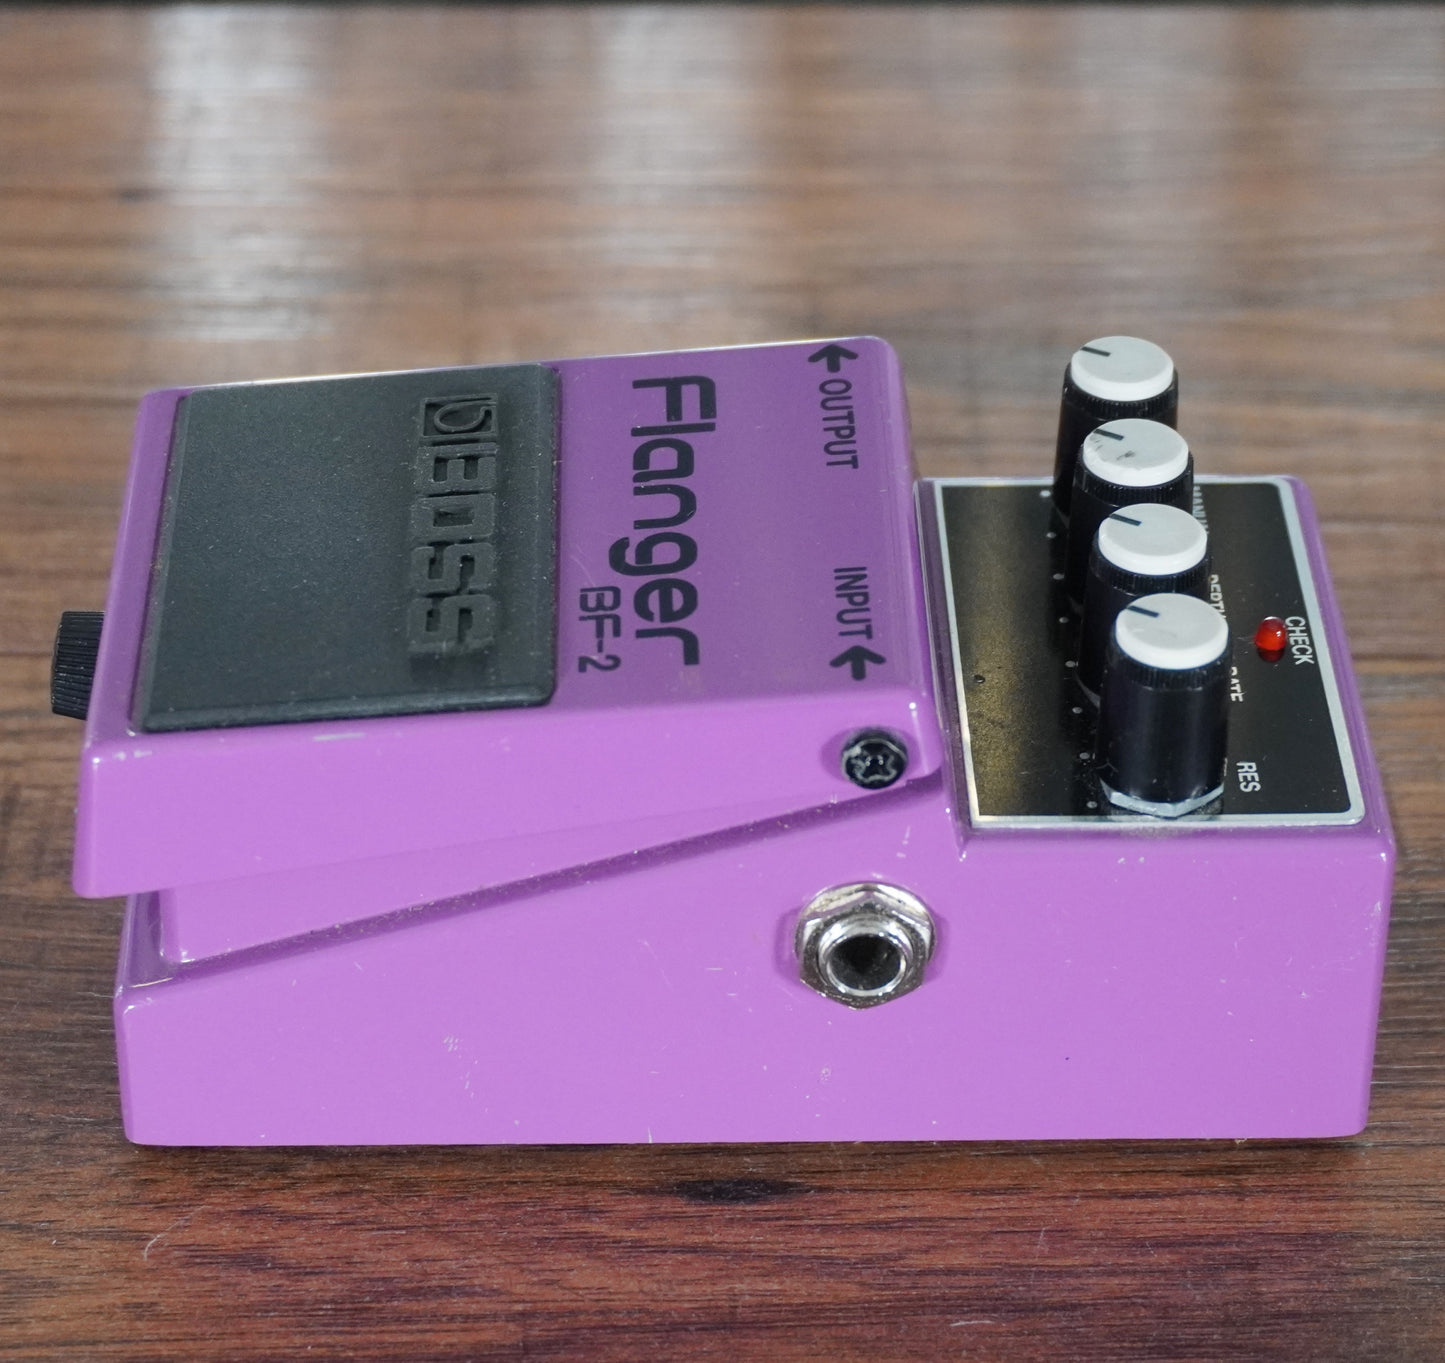 Boss BF-2 Flanger Guitar Effect Pedal Used